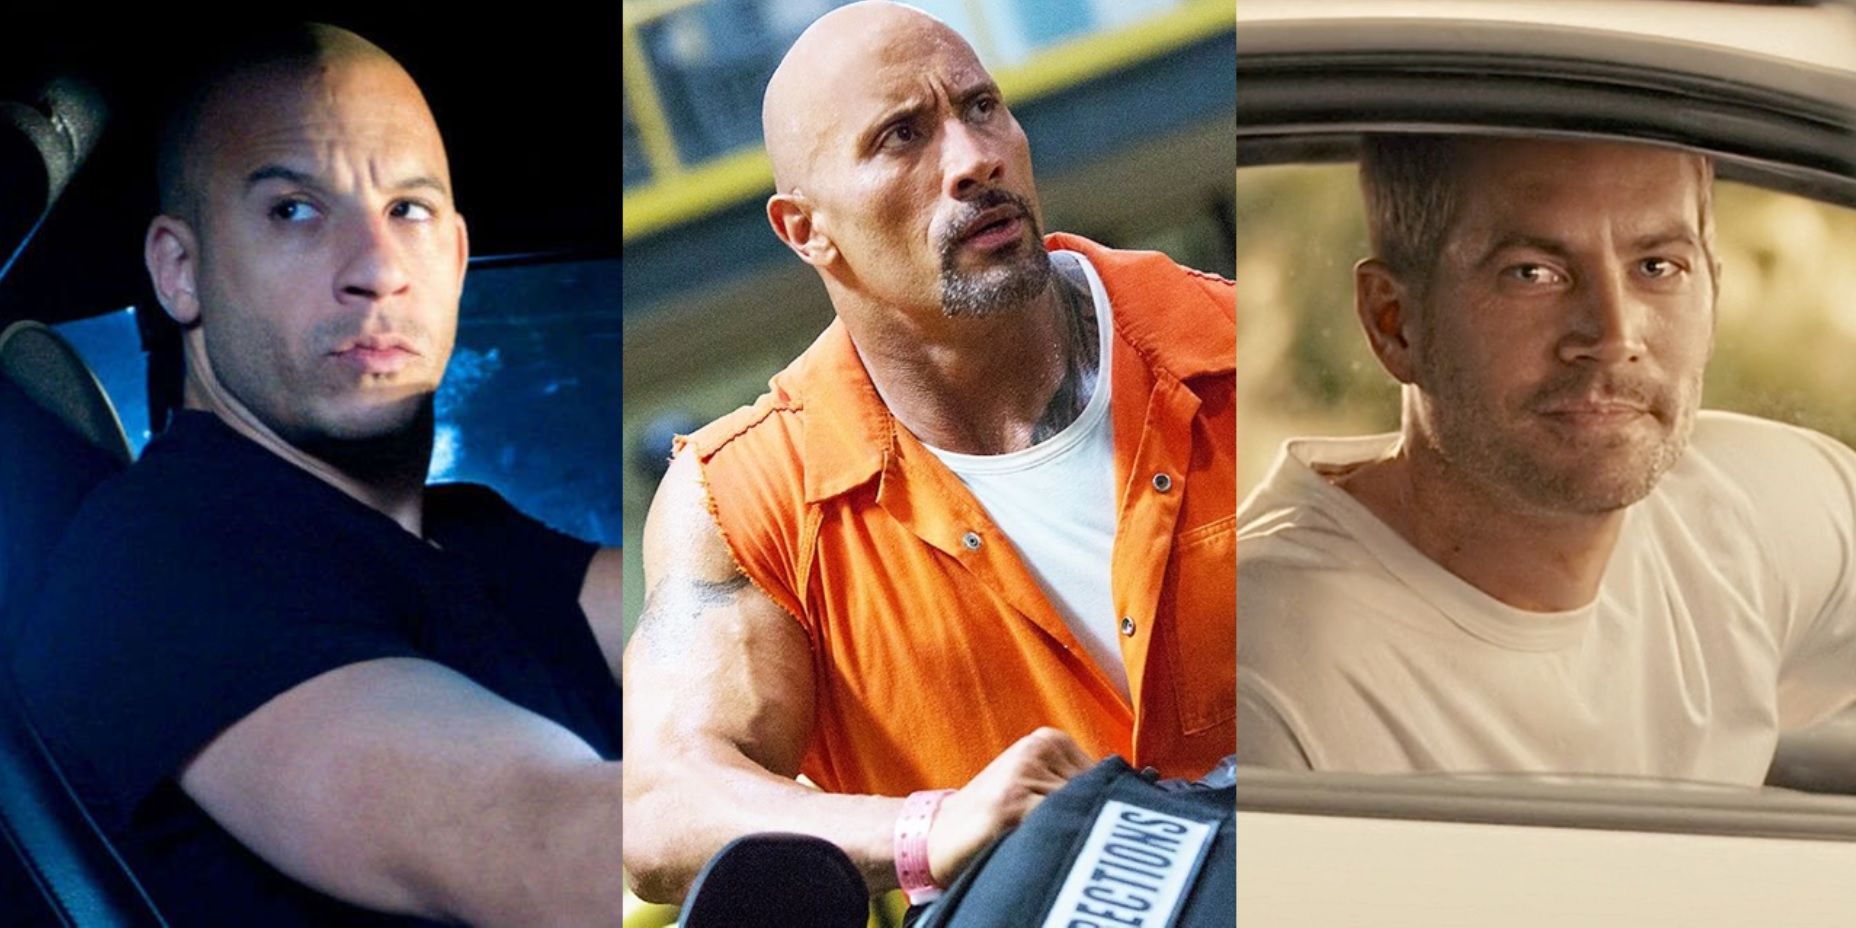 Split image of Vin Diesel in Fast and Furious, Dwayne Johnson in The Fate of the Furious, and Paul Walker in Furious 7